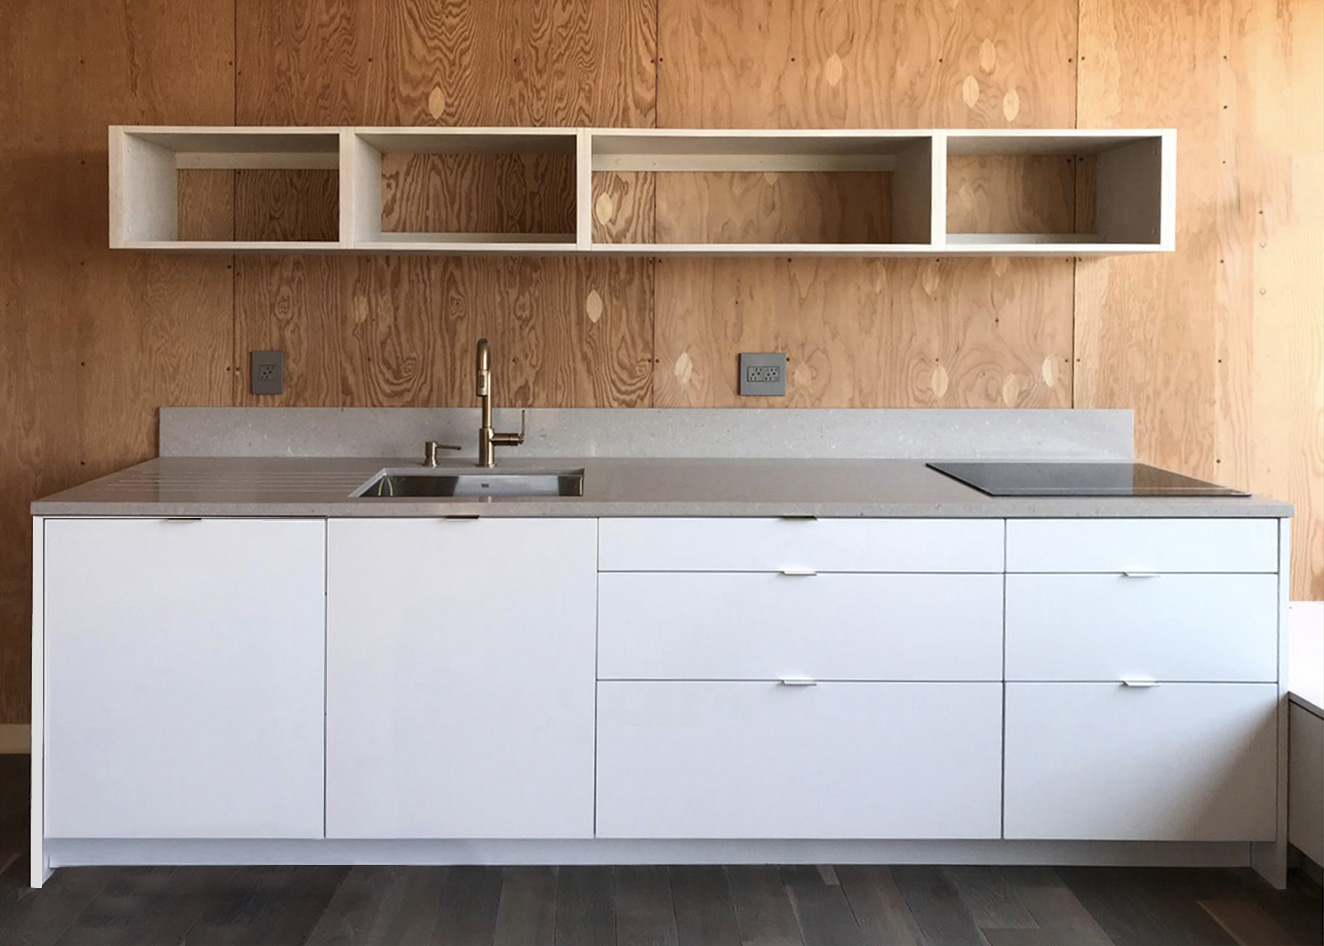 The cabinetry and fixtures of the lightHouse auxiliary dwelling units can be customised